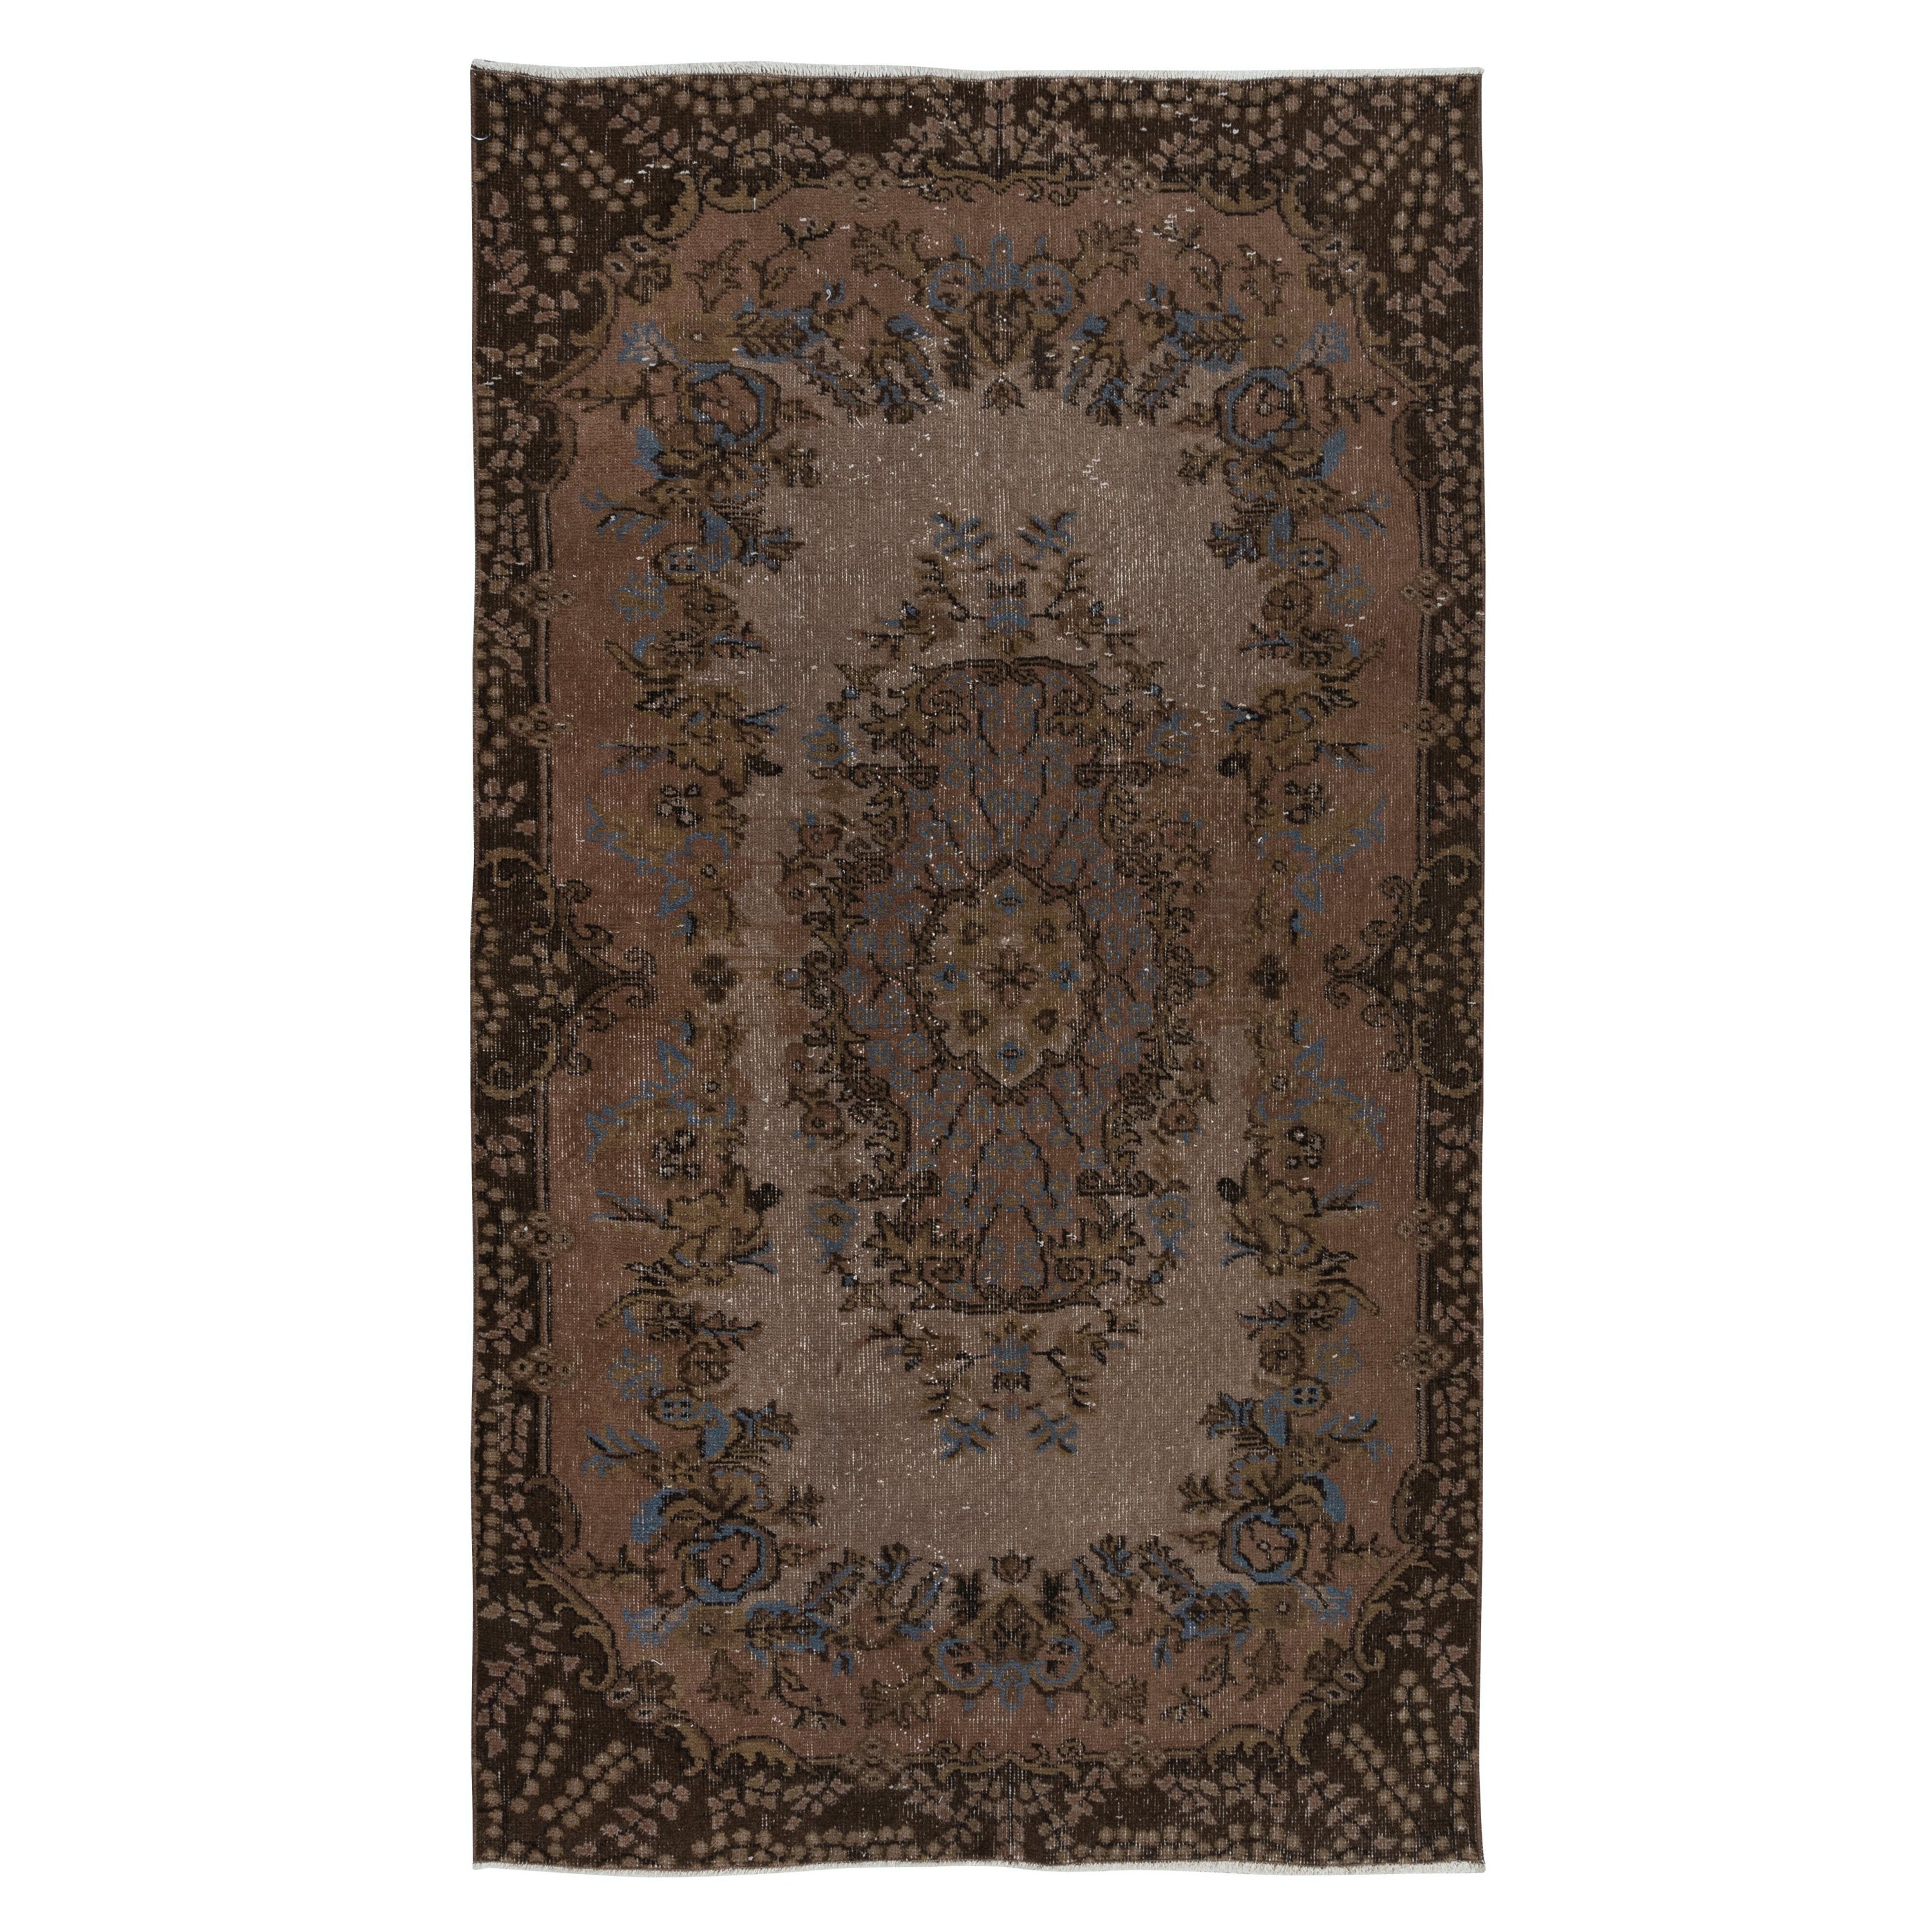 4x6.7 Ft Small Modern Brown Rug with Medallion Design, Handknotted in Turkey For Sale